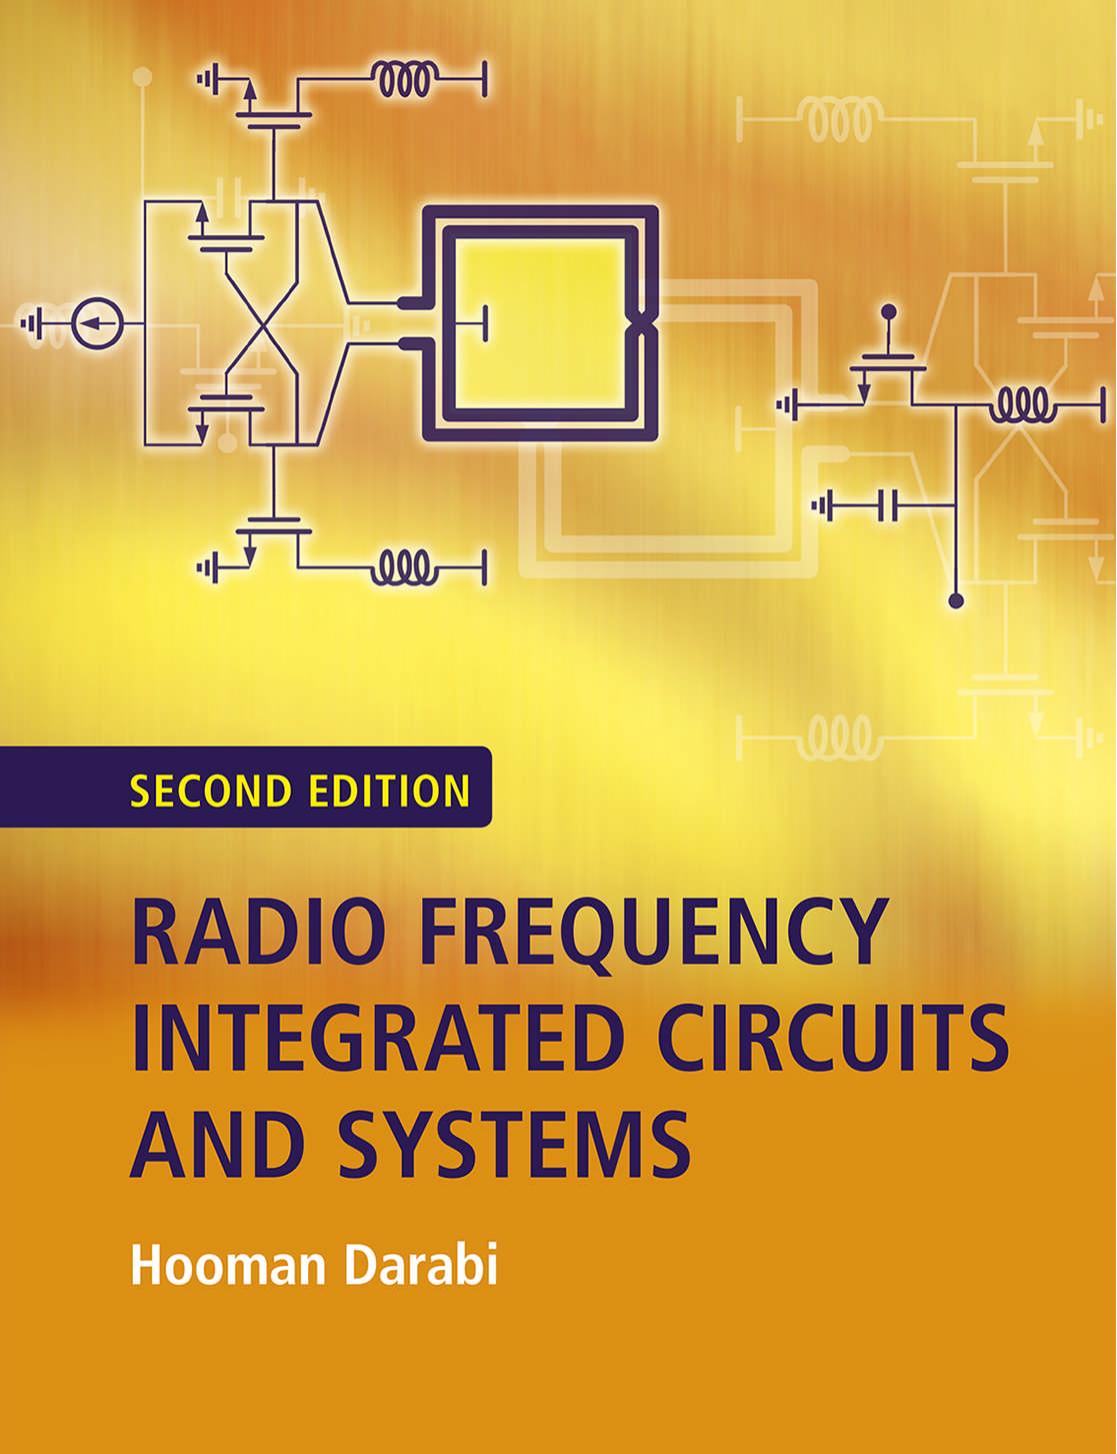 (eBook PDF)Radio Frequency Integrated Circuits and Systems 2nd Edition by Hooman Darabi